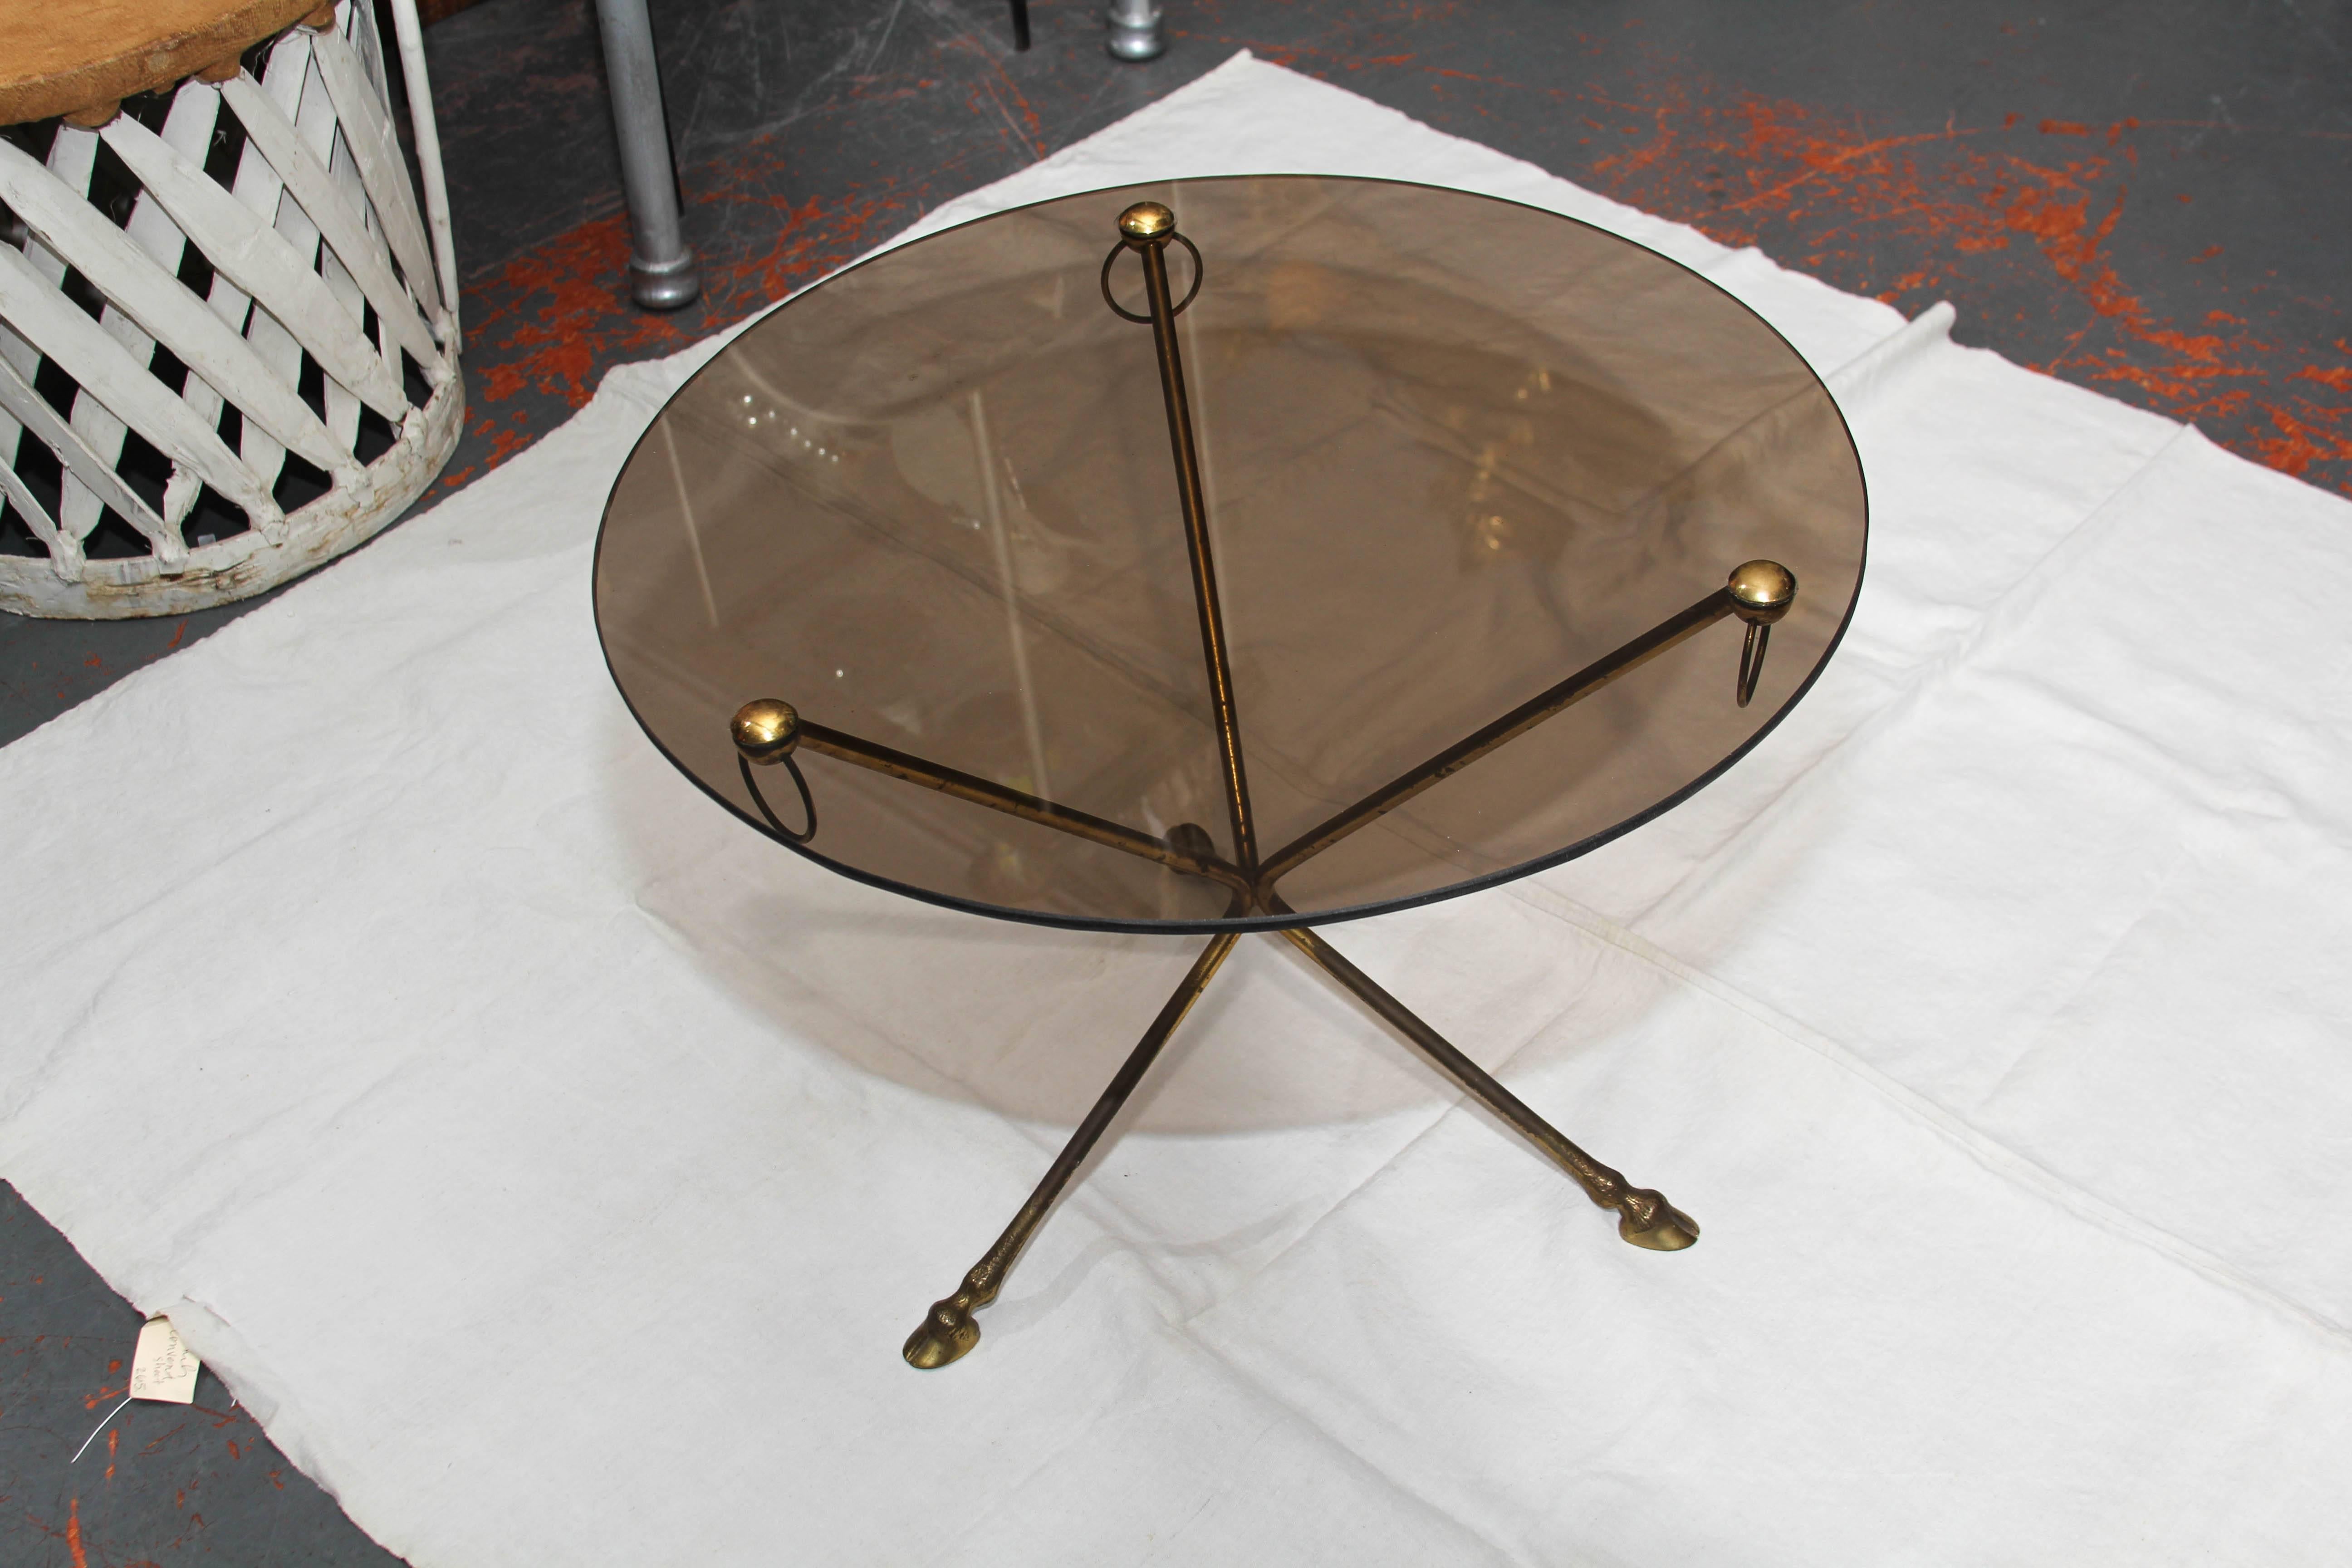 Diminutive  French smoke-glass and patinated brass side table / smoking table with a tripod base, decorative brass ring accents and exquisite deer hoof feet.  